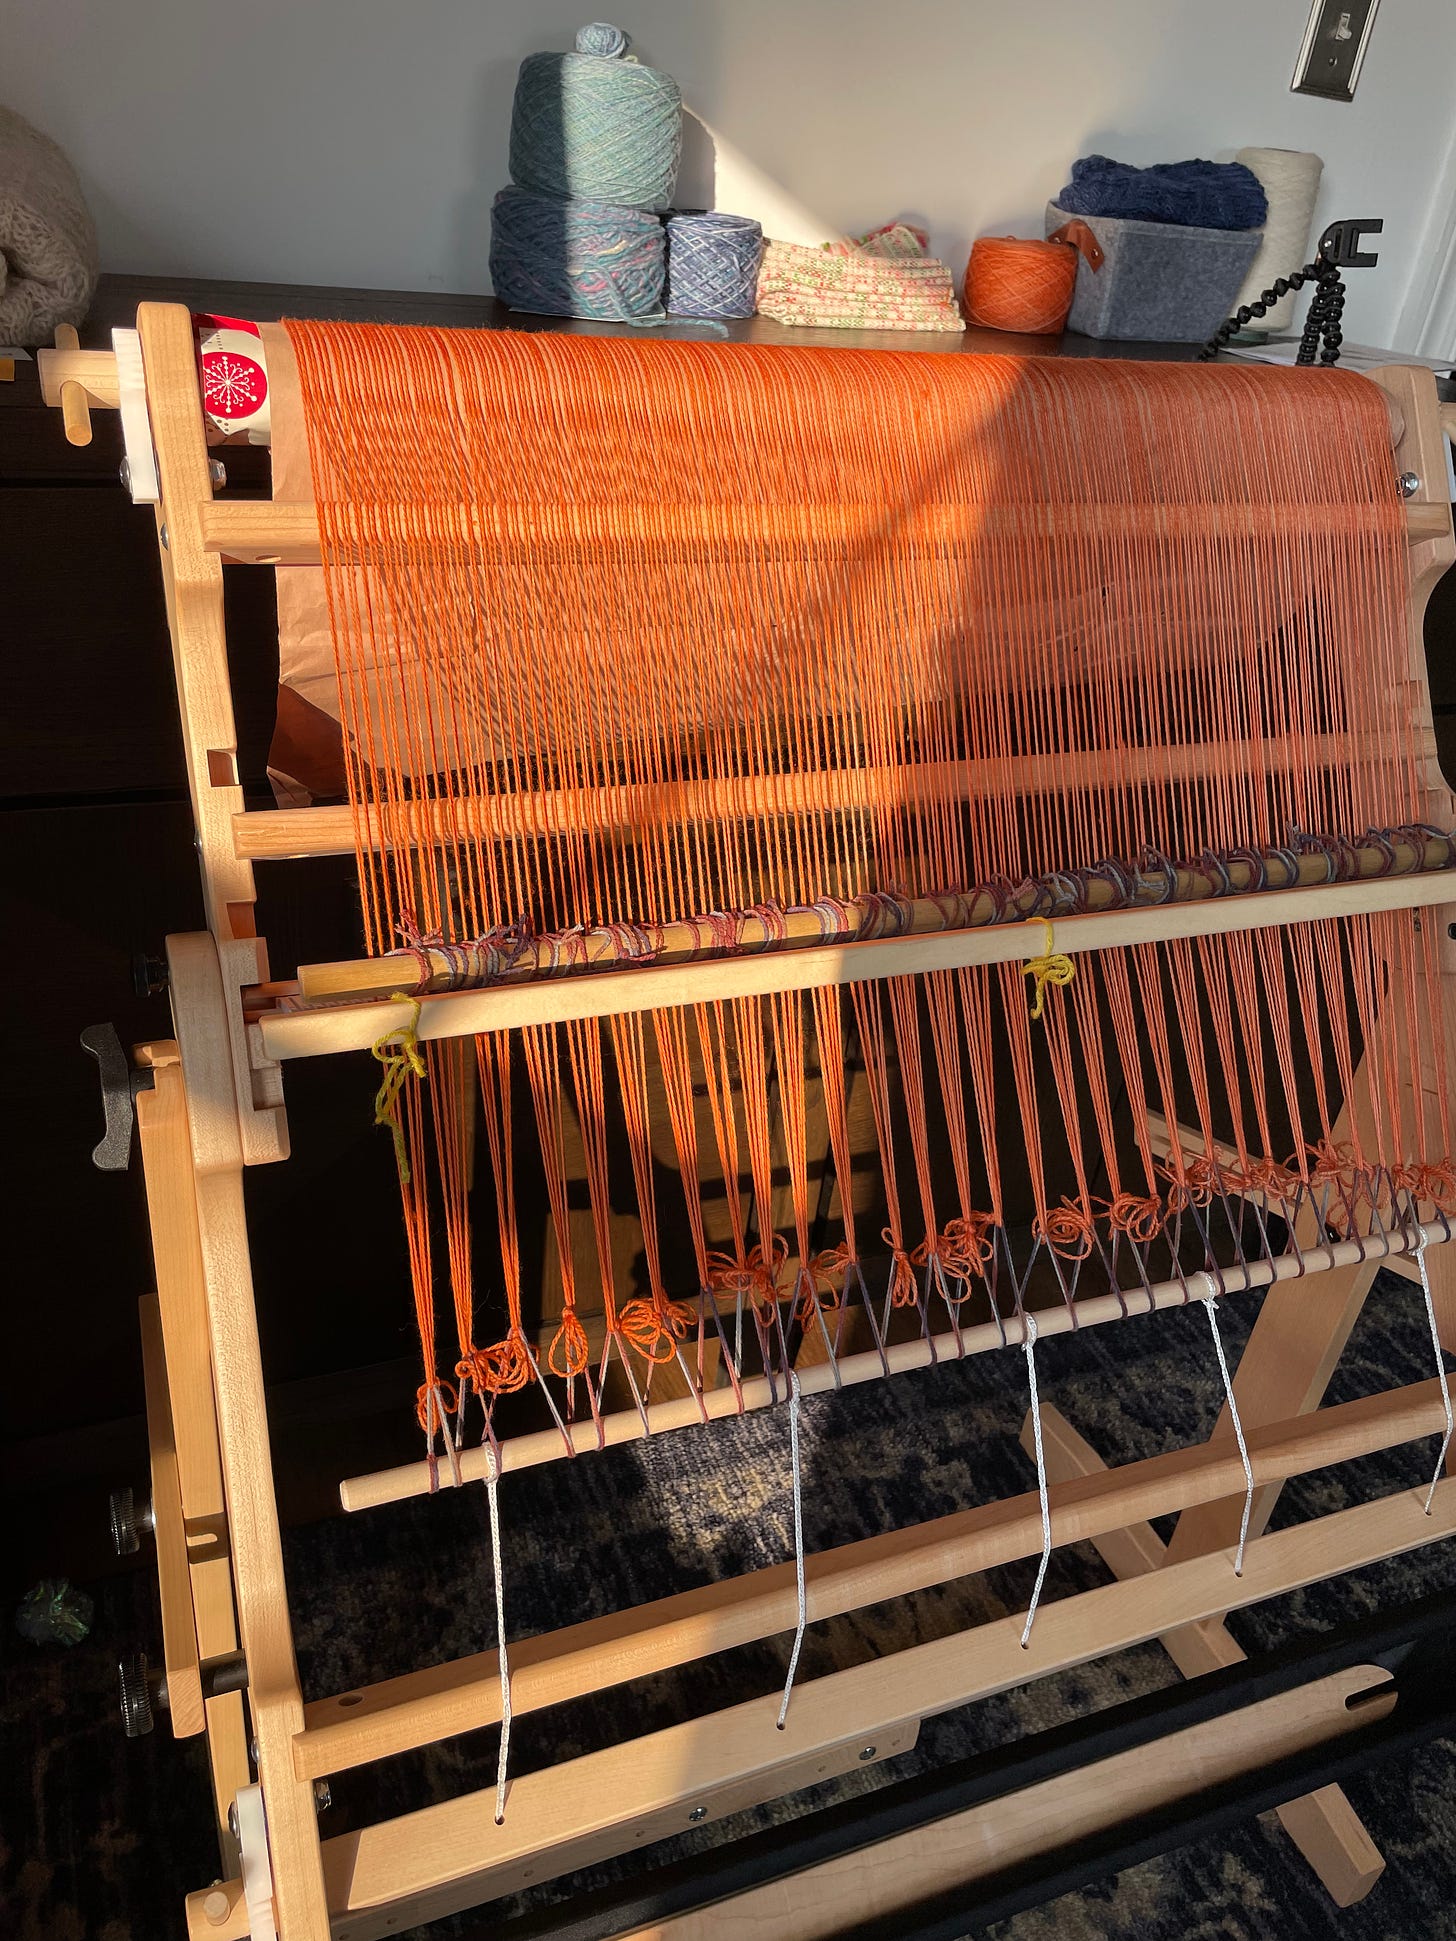 A Flip rigid heddle loom with an orange warp rolled onto the back beam.